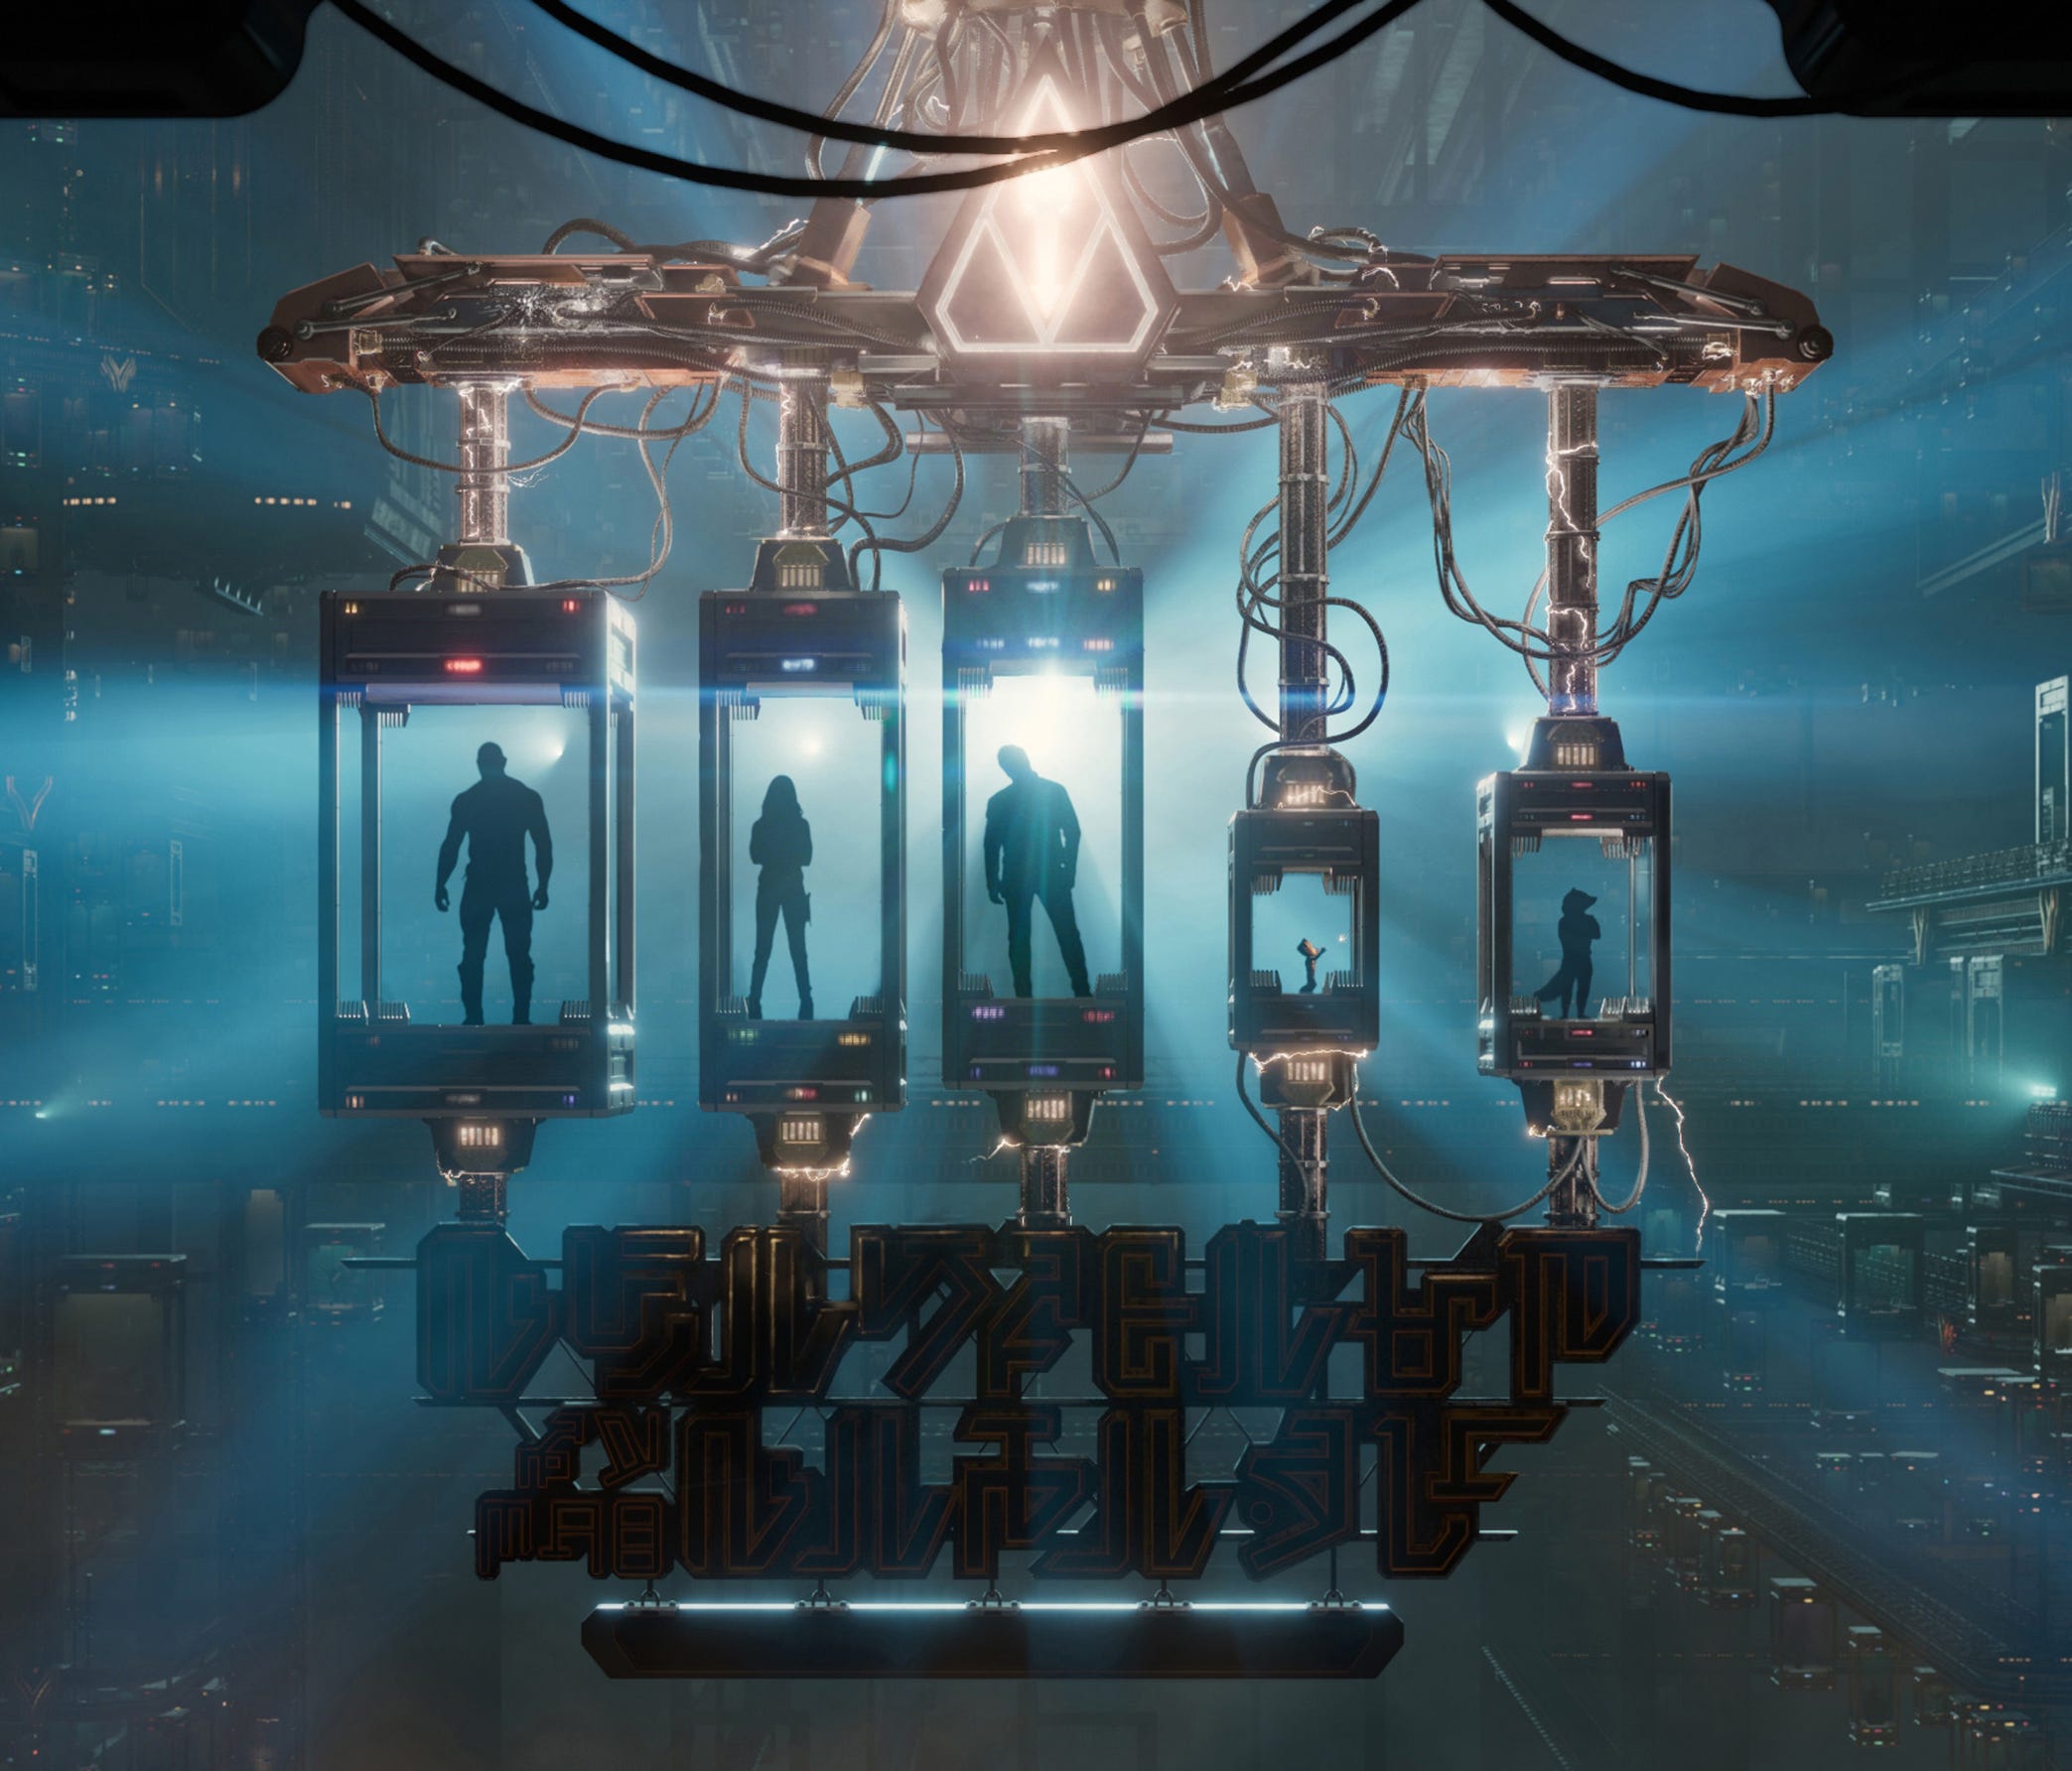 Guardians of the Galaxy - Mission: BREAKOUT! -- Rocket enlists the aid of guests at Disney California Adventure to help free his fellow Guardians of the Galaxy, who have been captured by The Collector. This all-new experience opens on May 27 (Disneyl